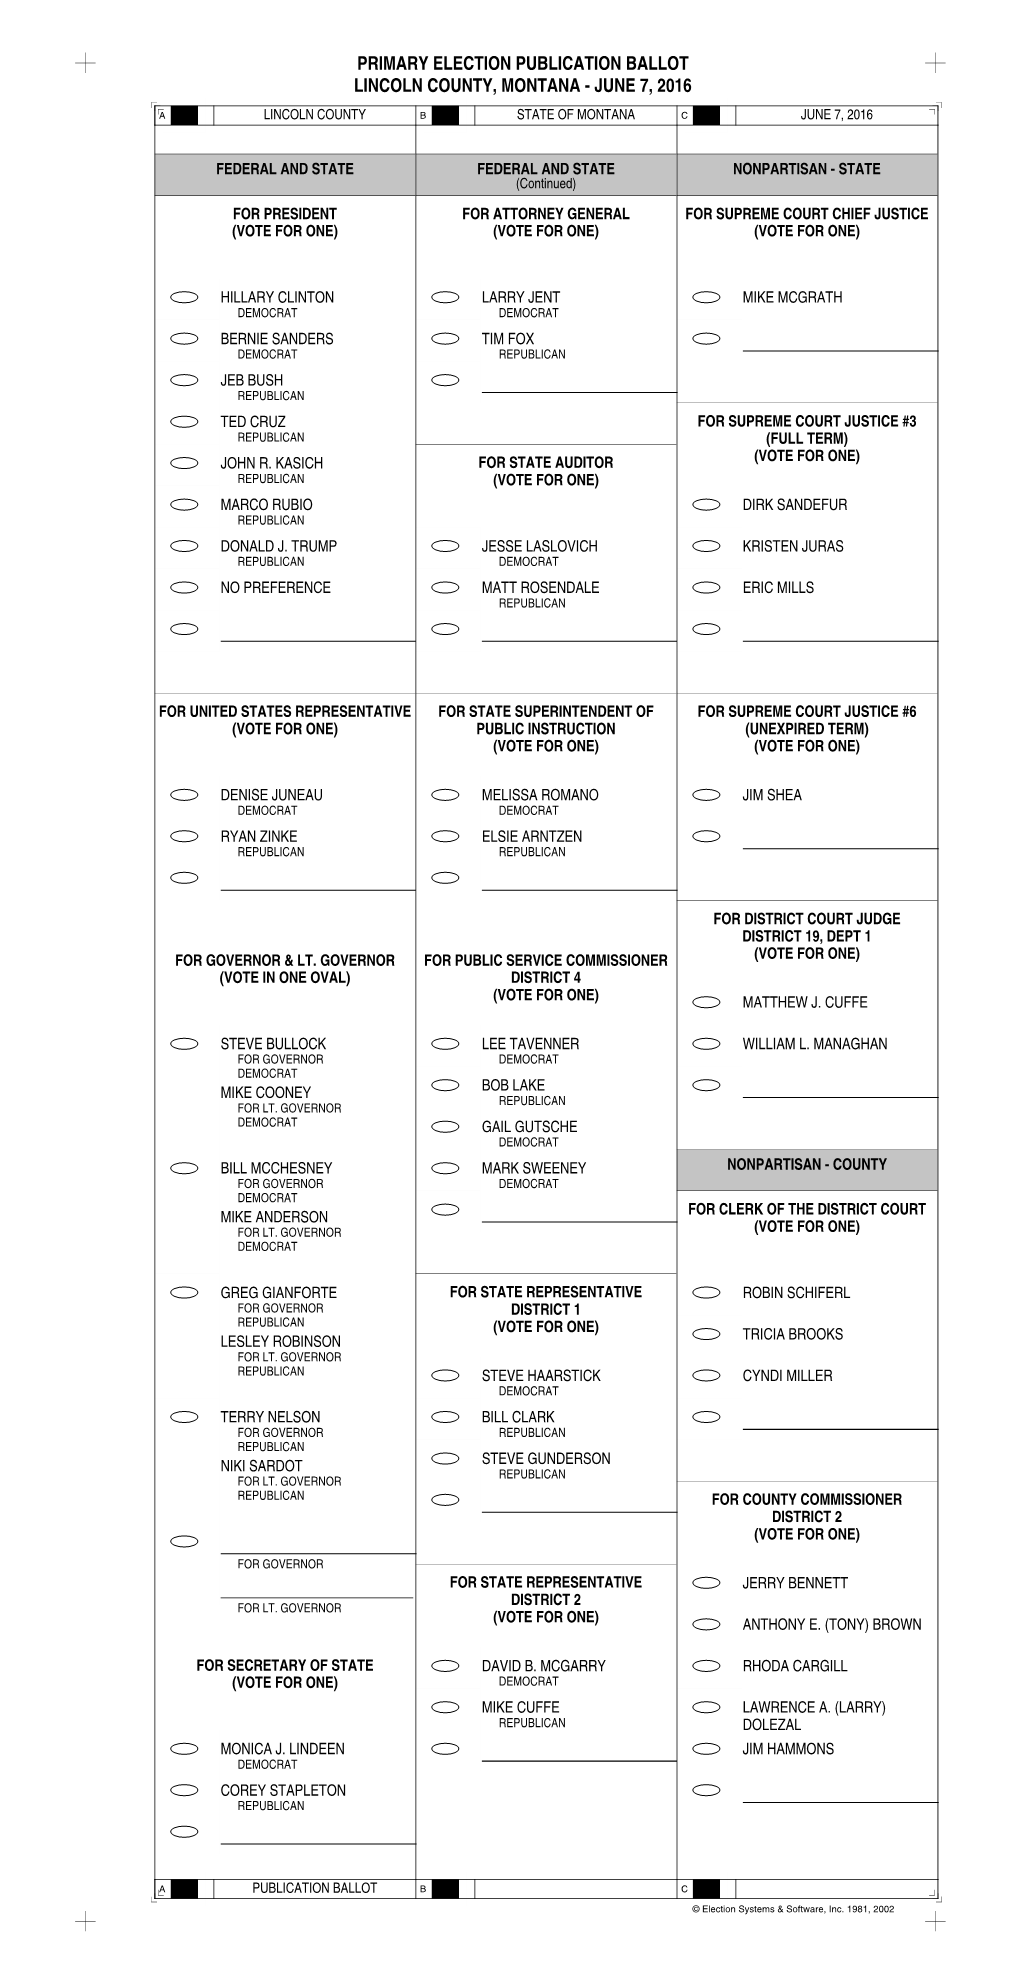 Primary Election Publication Ballot Lincoln County, Montana - June 7, 2016